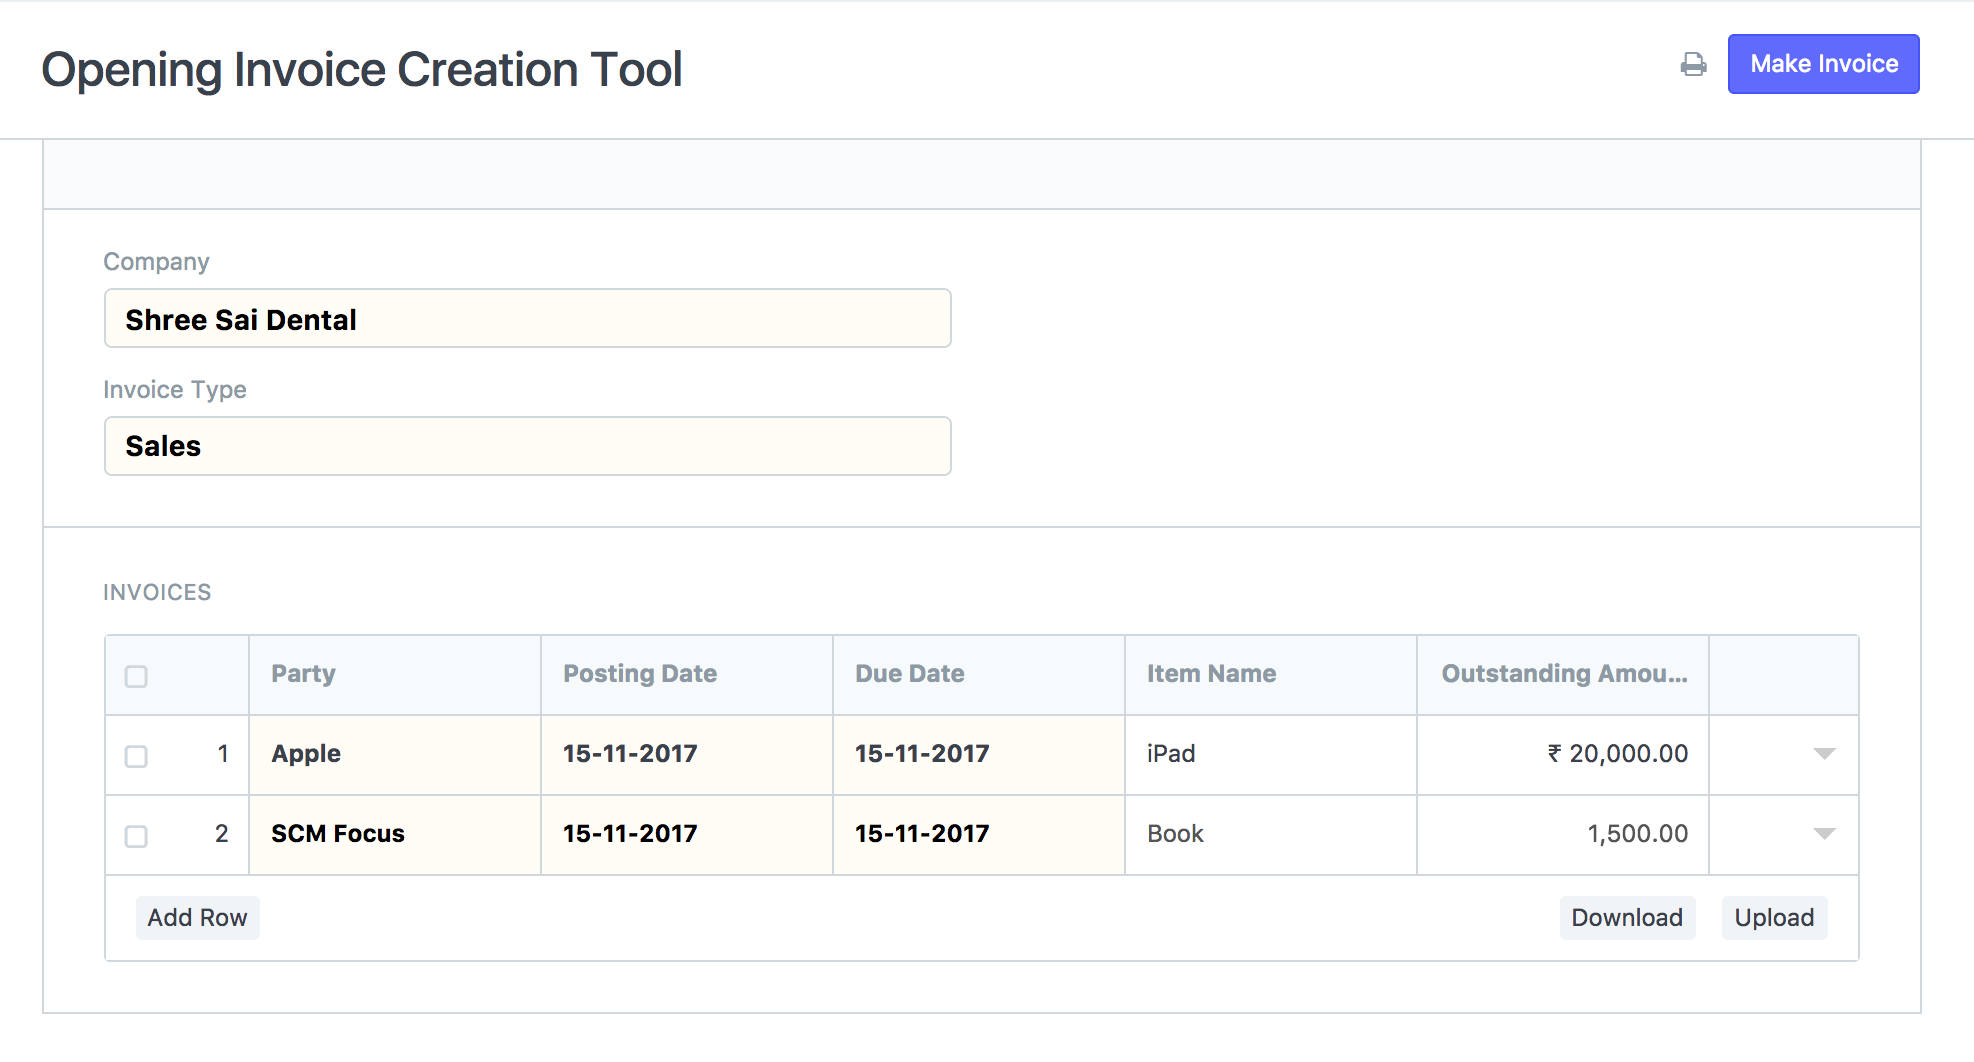 Opening Invoice Creation Tool